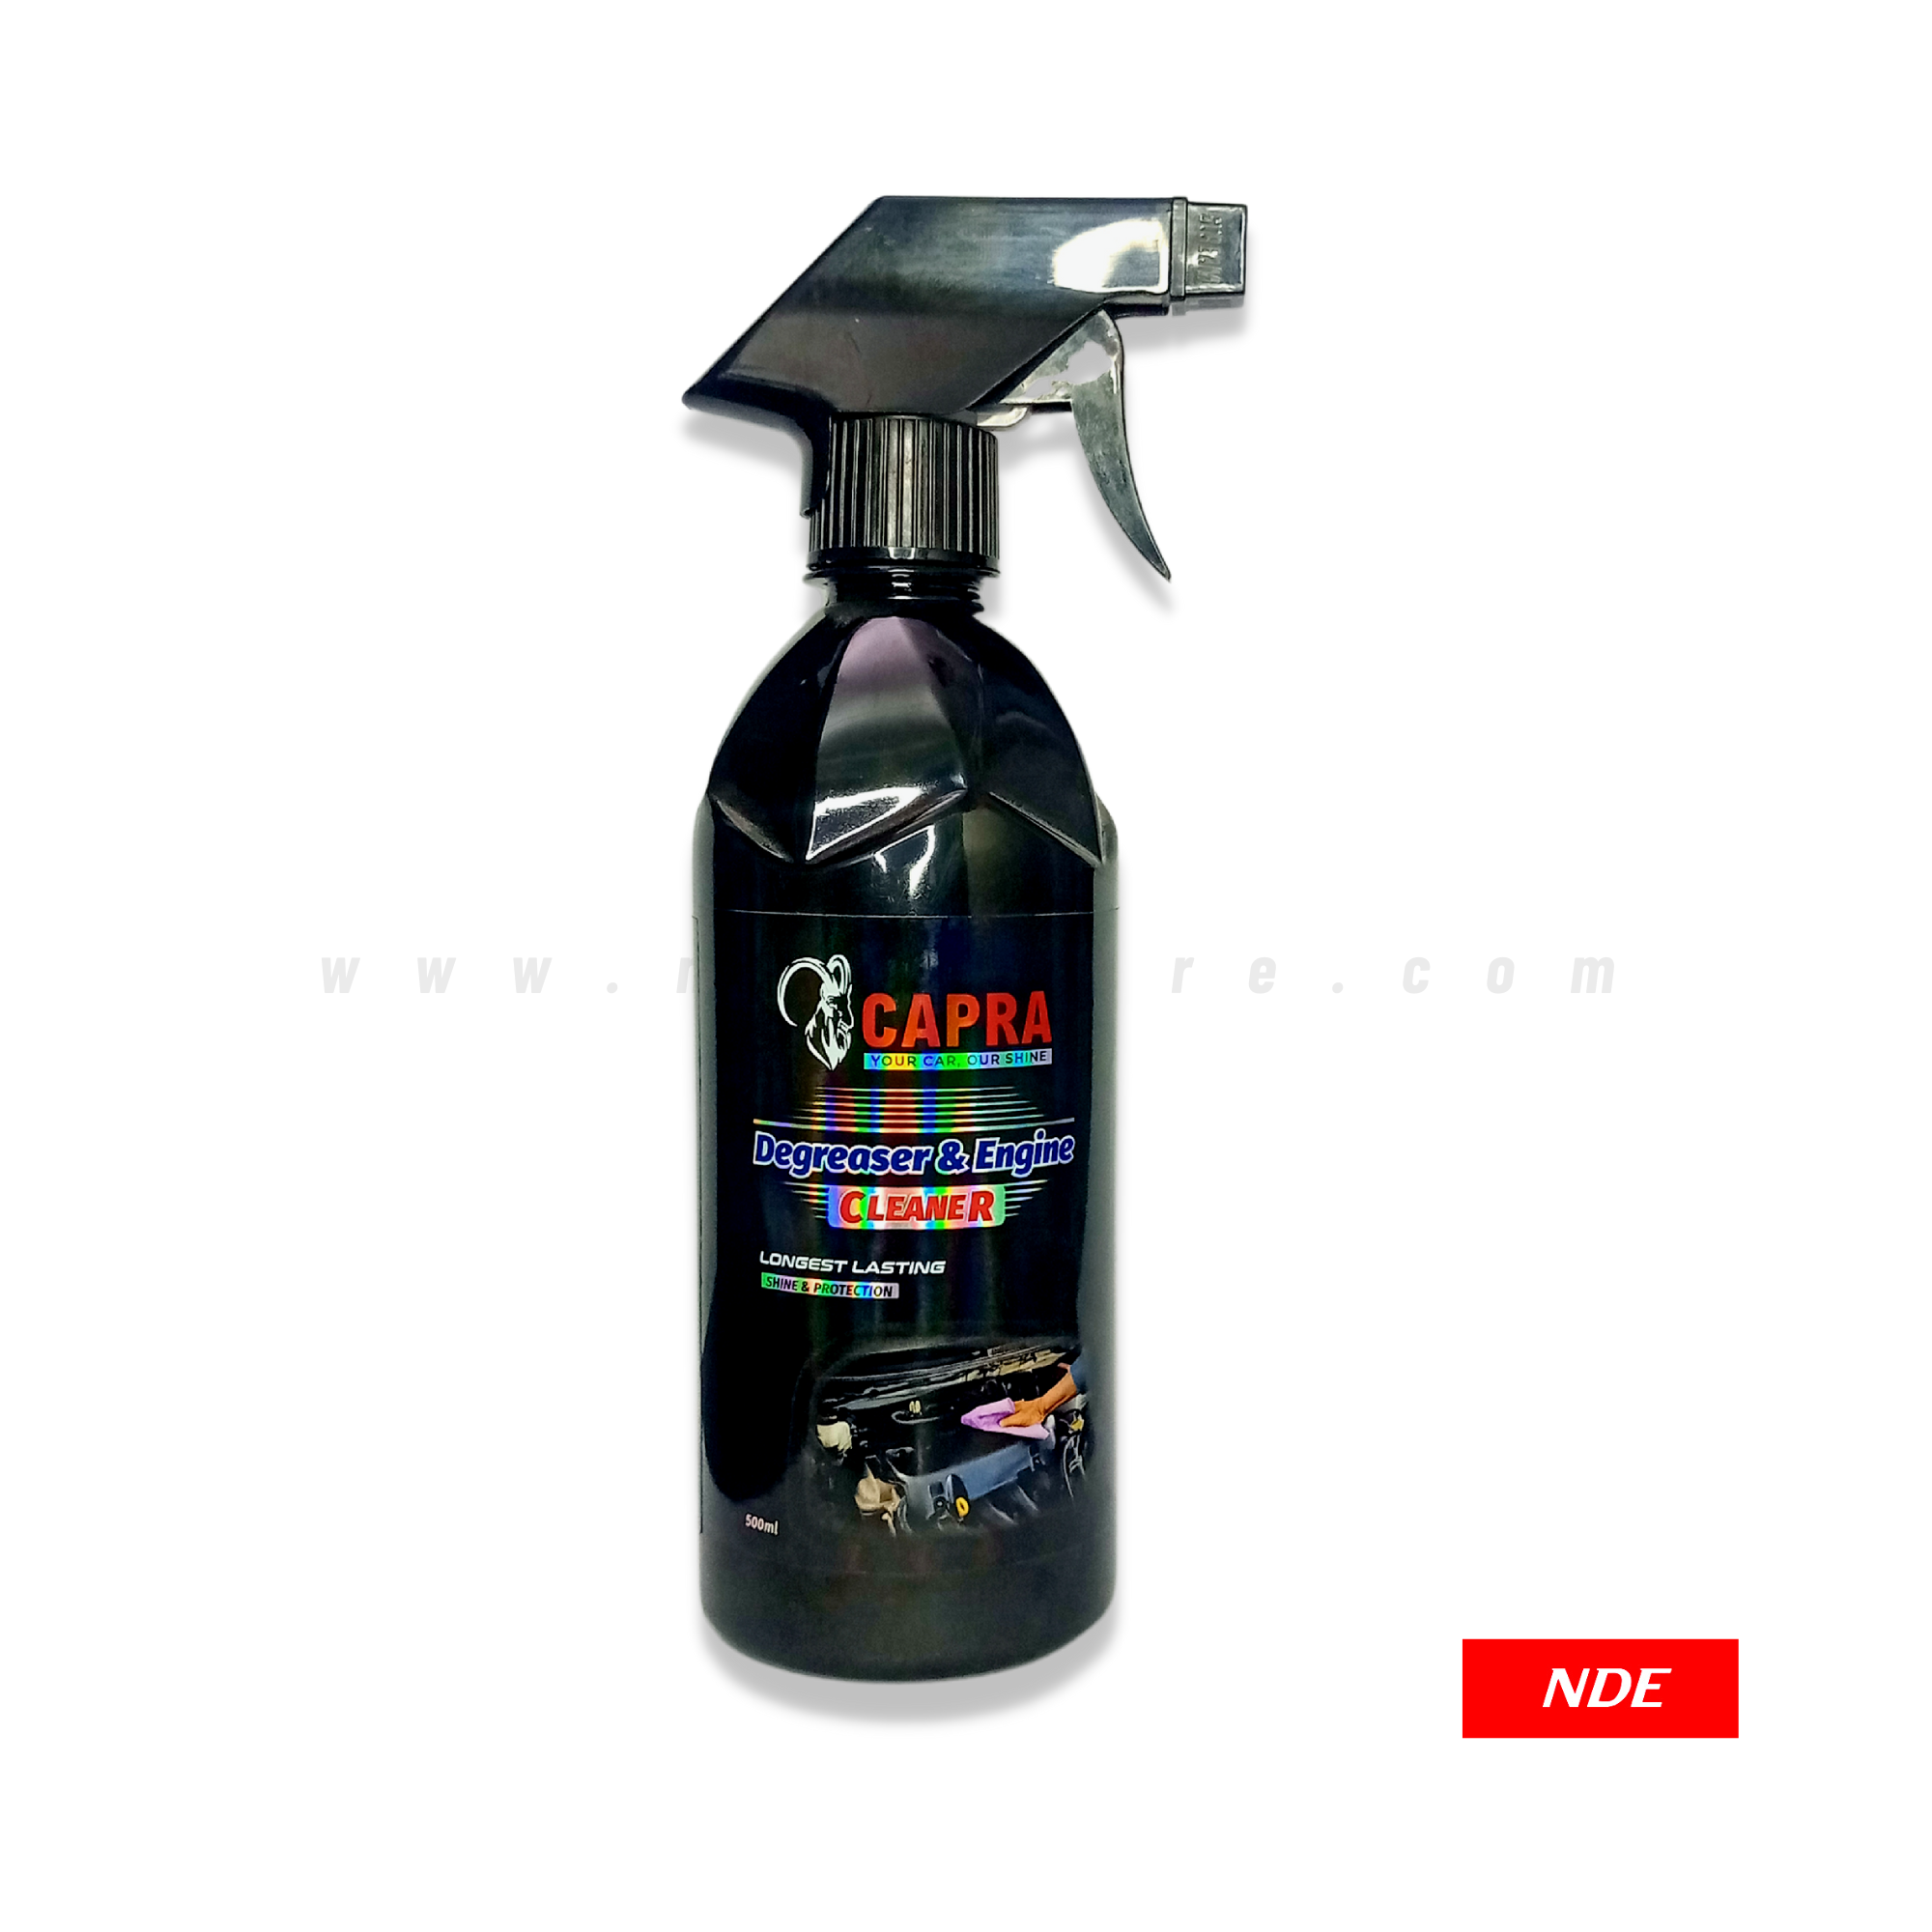 CAPRA DEGREASER AND ENGINE CLEANER SPRAY 500ML - NDE STORE